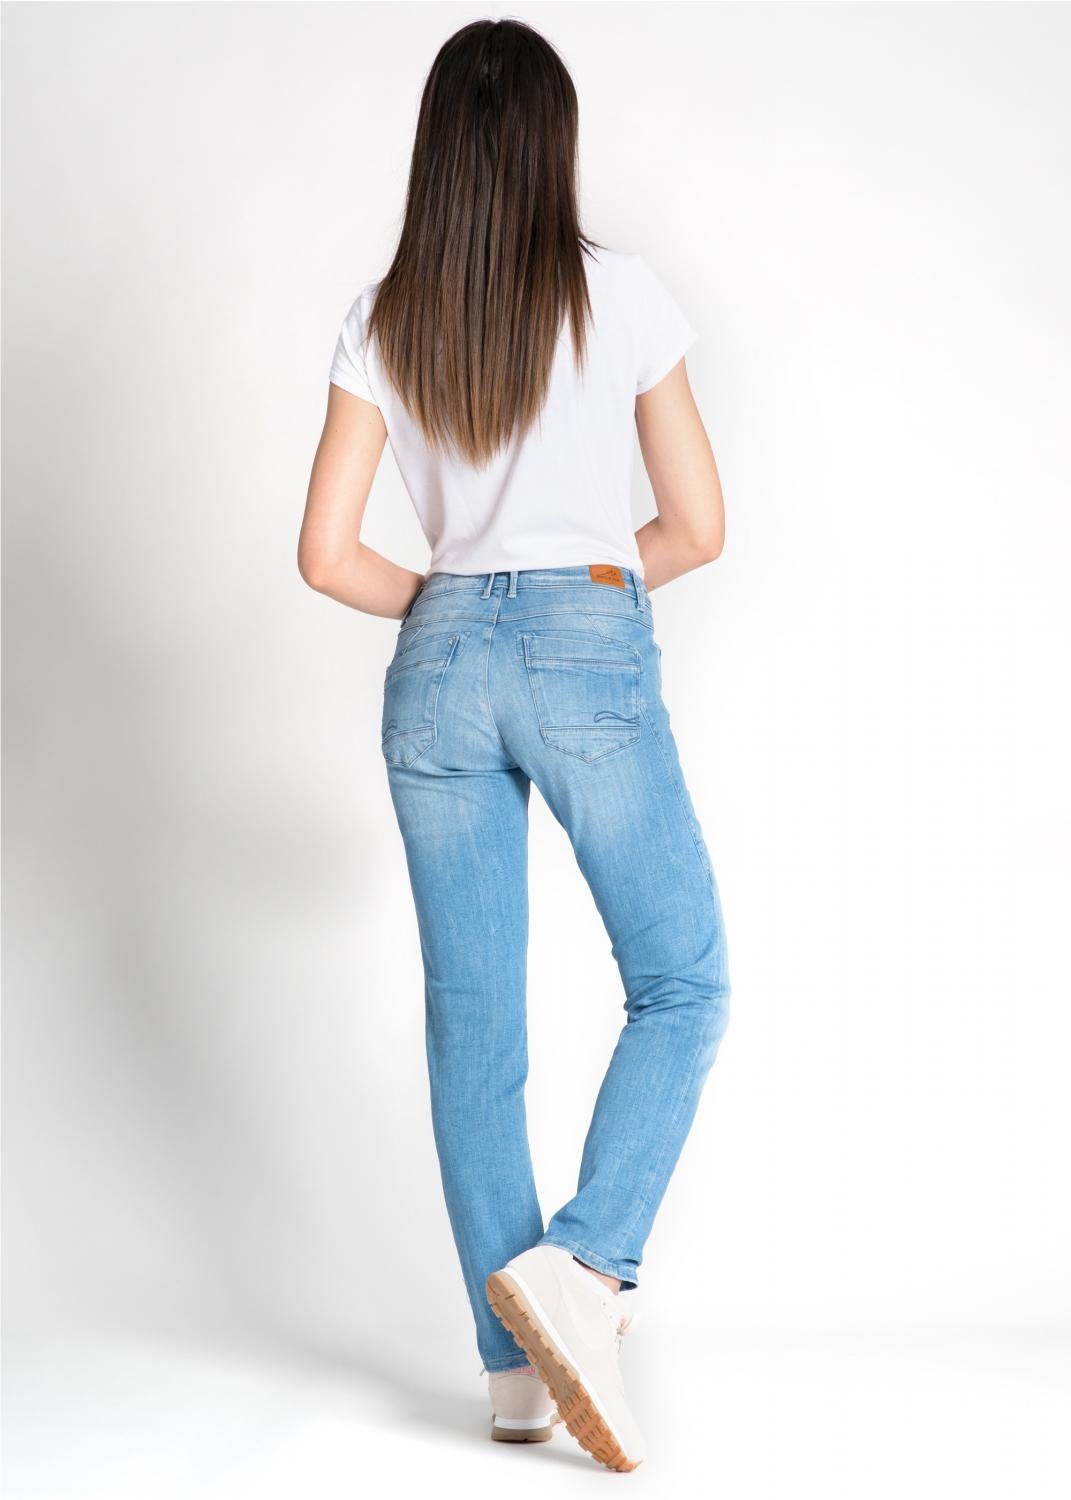 blue MOD JEANS Miracle REA cairo Denim of Stretch-Jeans NOS SP19-2012.2308